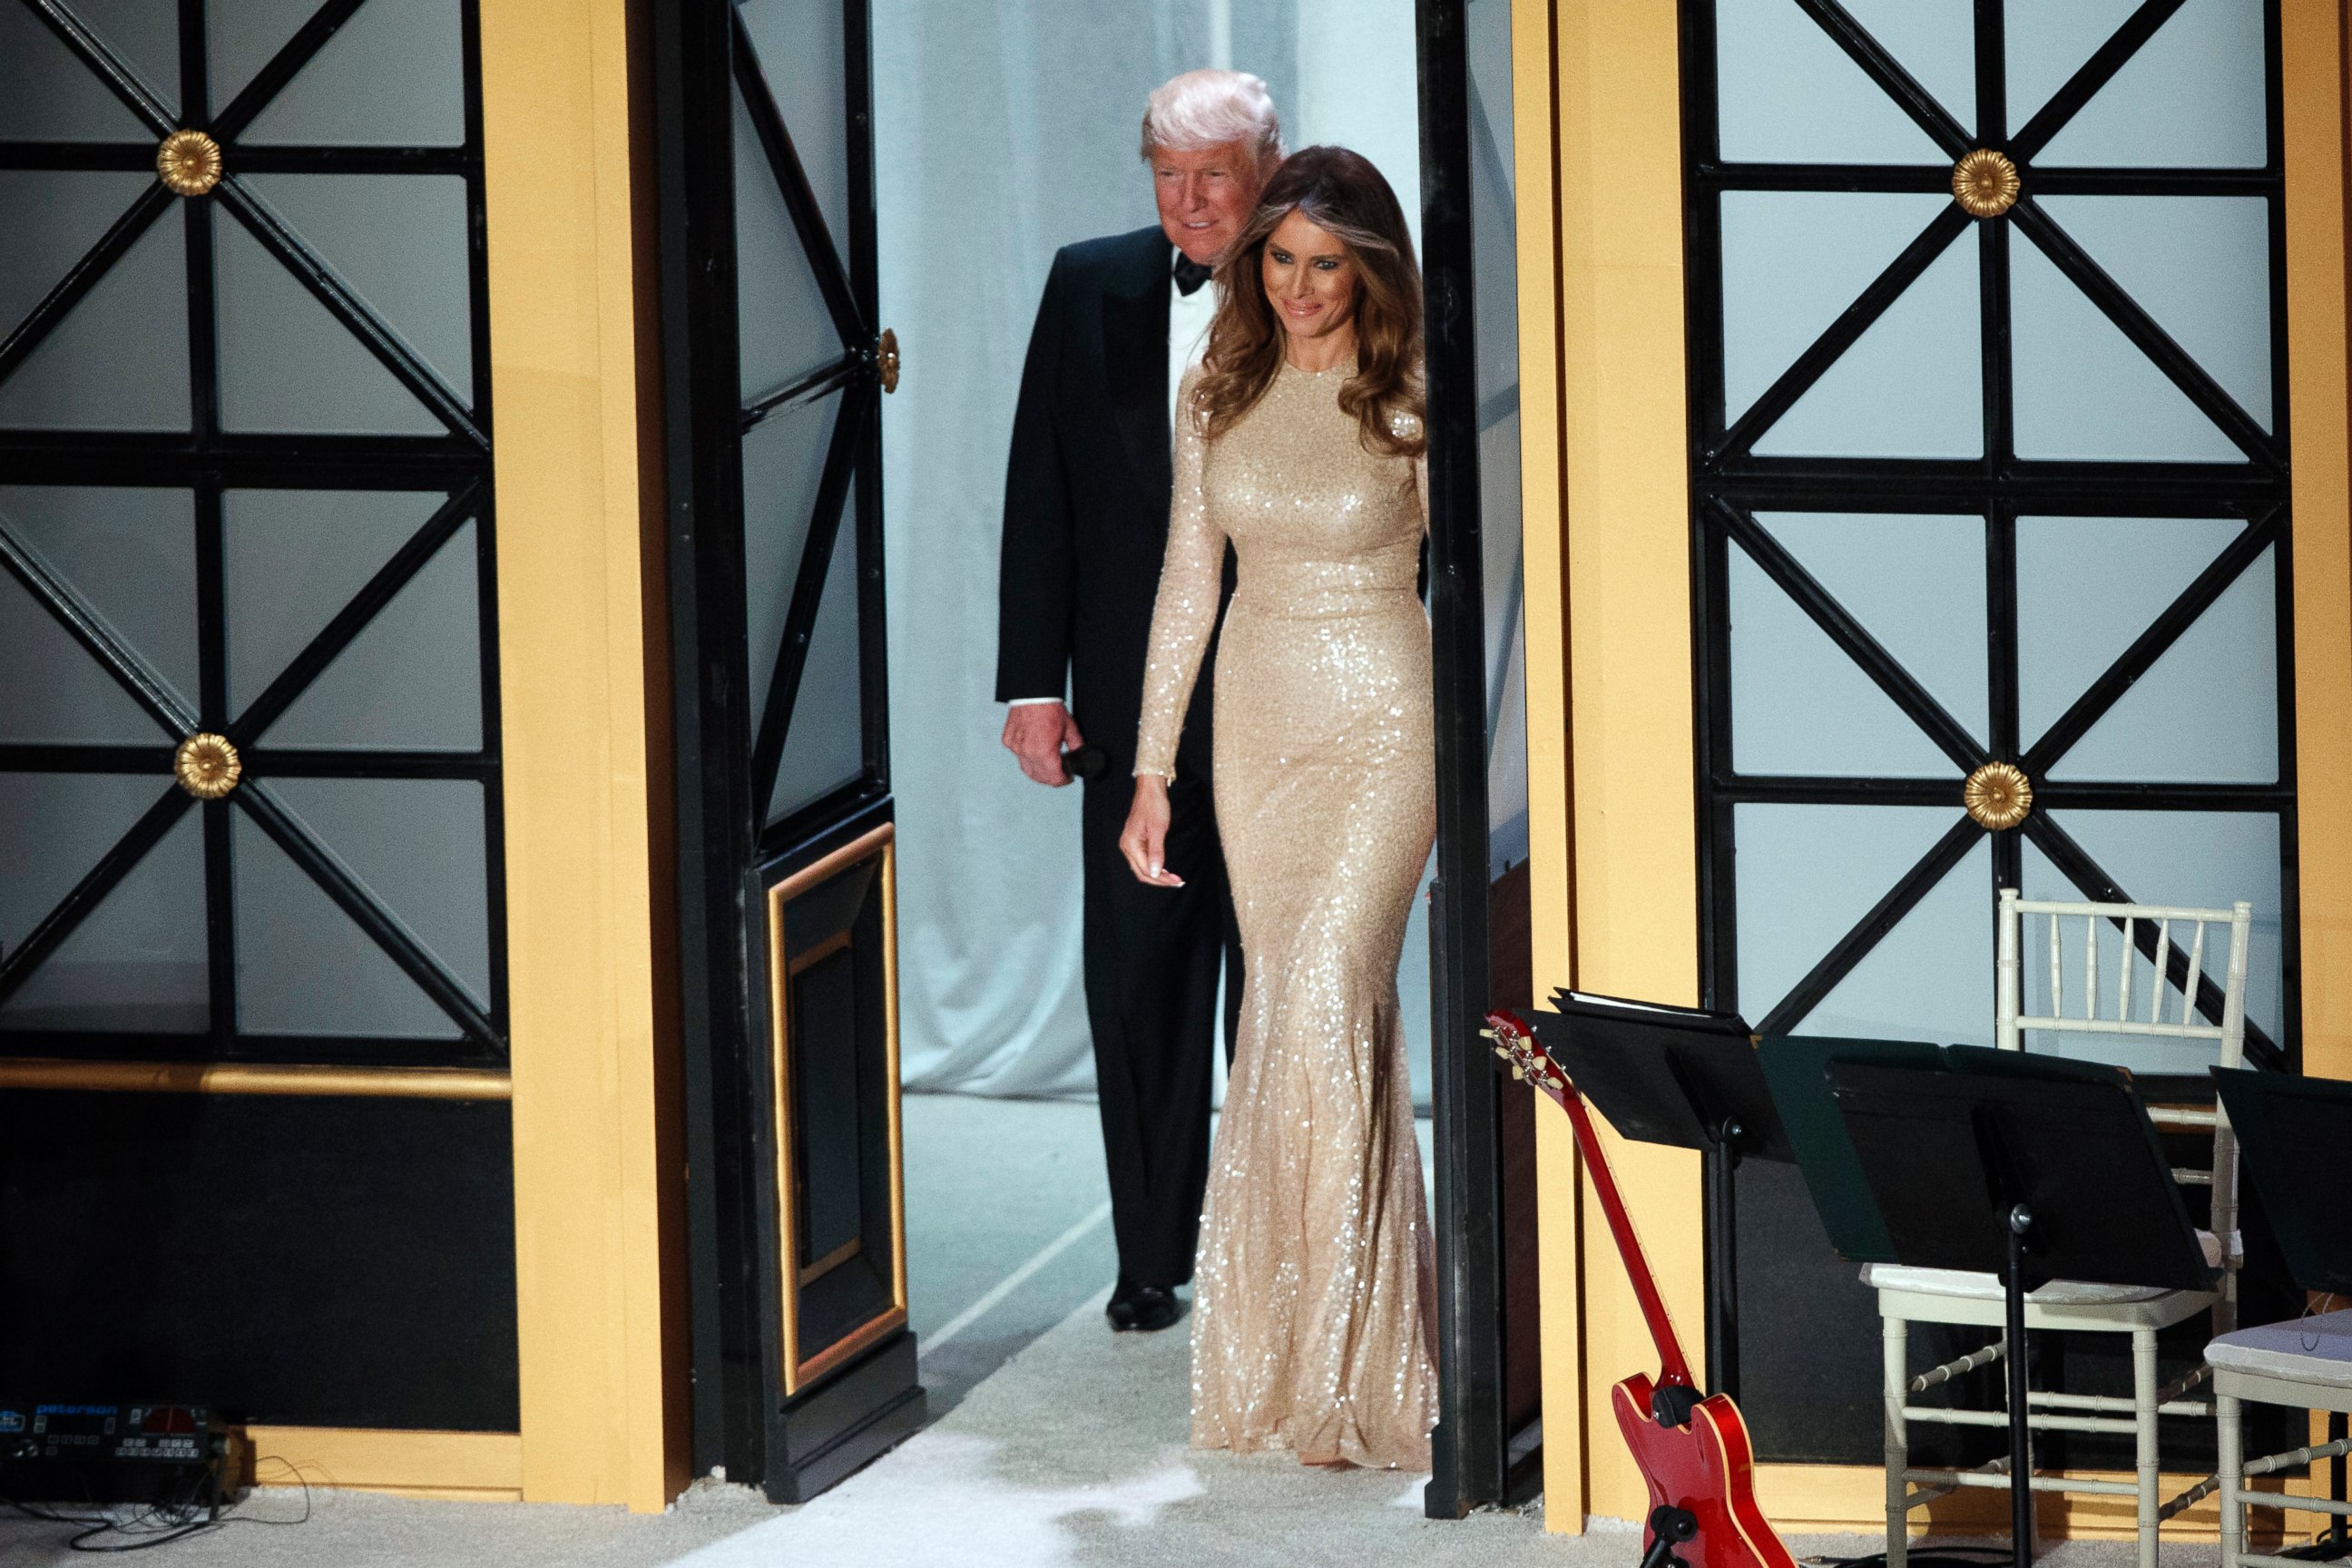 PHOTO: President-elect Donald Trump and his wife Melania arrive to a VIP reception and dinner with donors, Jan. 19, 2017, in Washington.